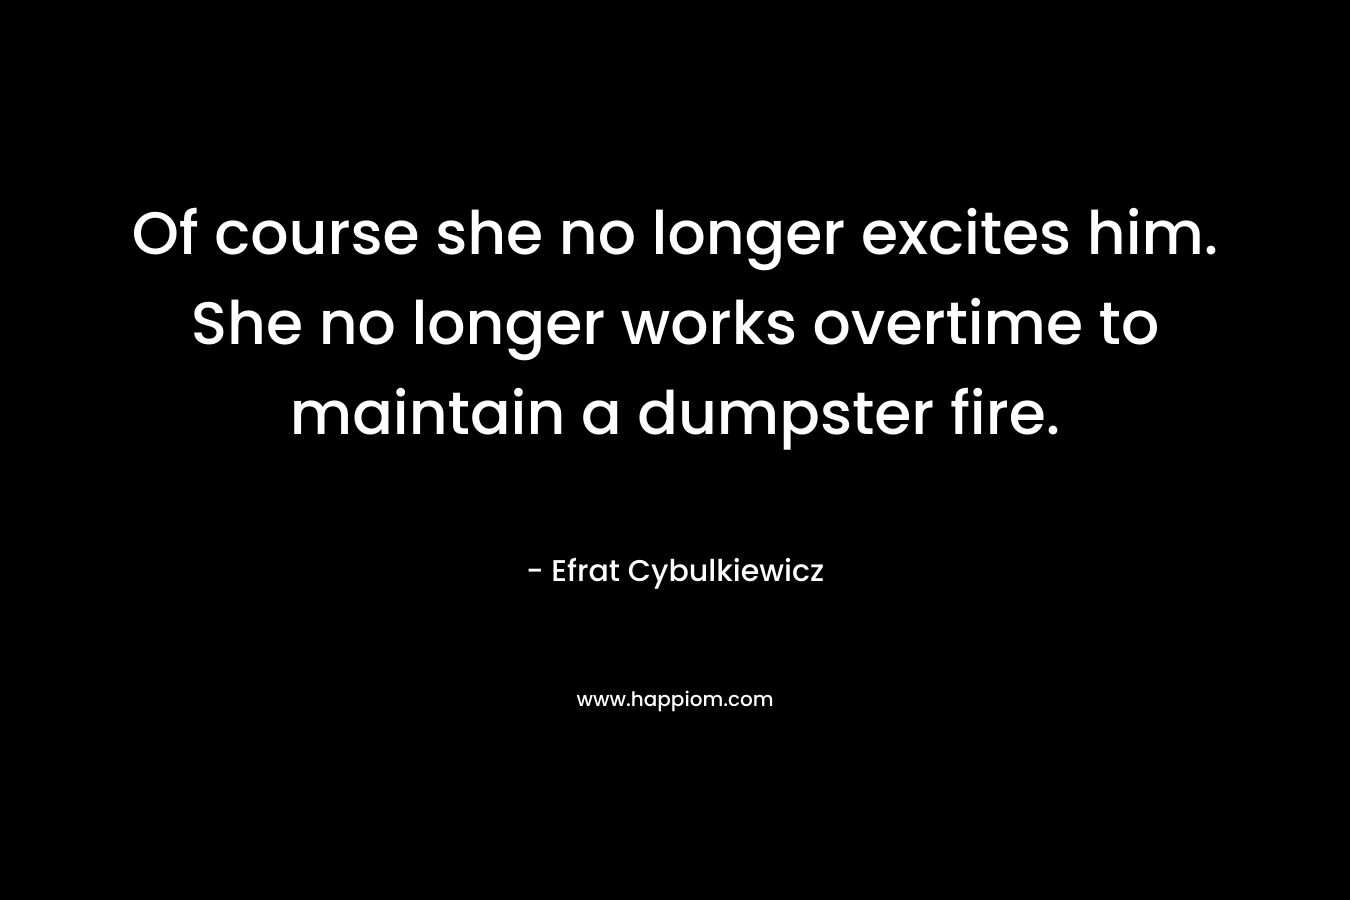 Of course she no longer excites him. She no longer works overtime to maintain a dumpster fire. – Efrat Cybulkiewicz